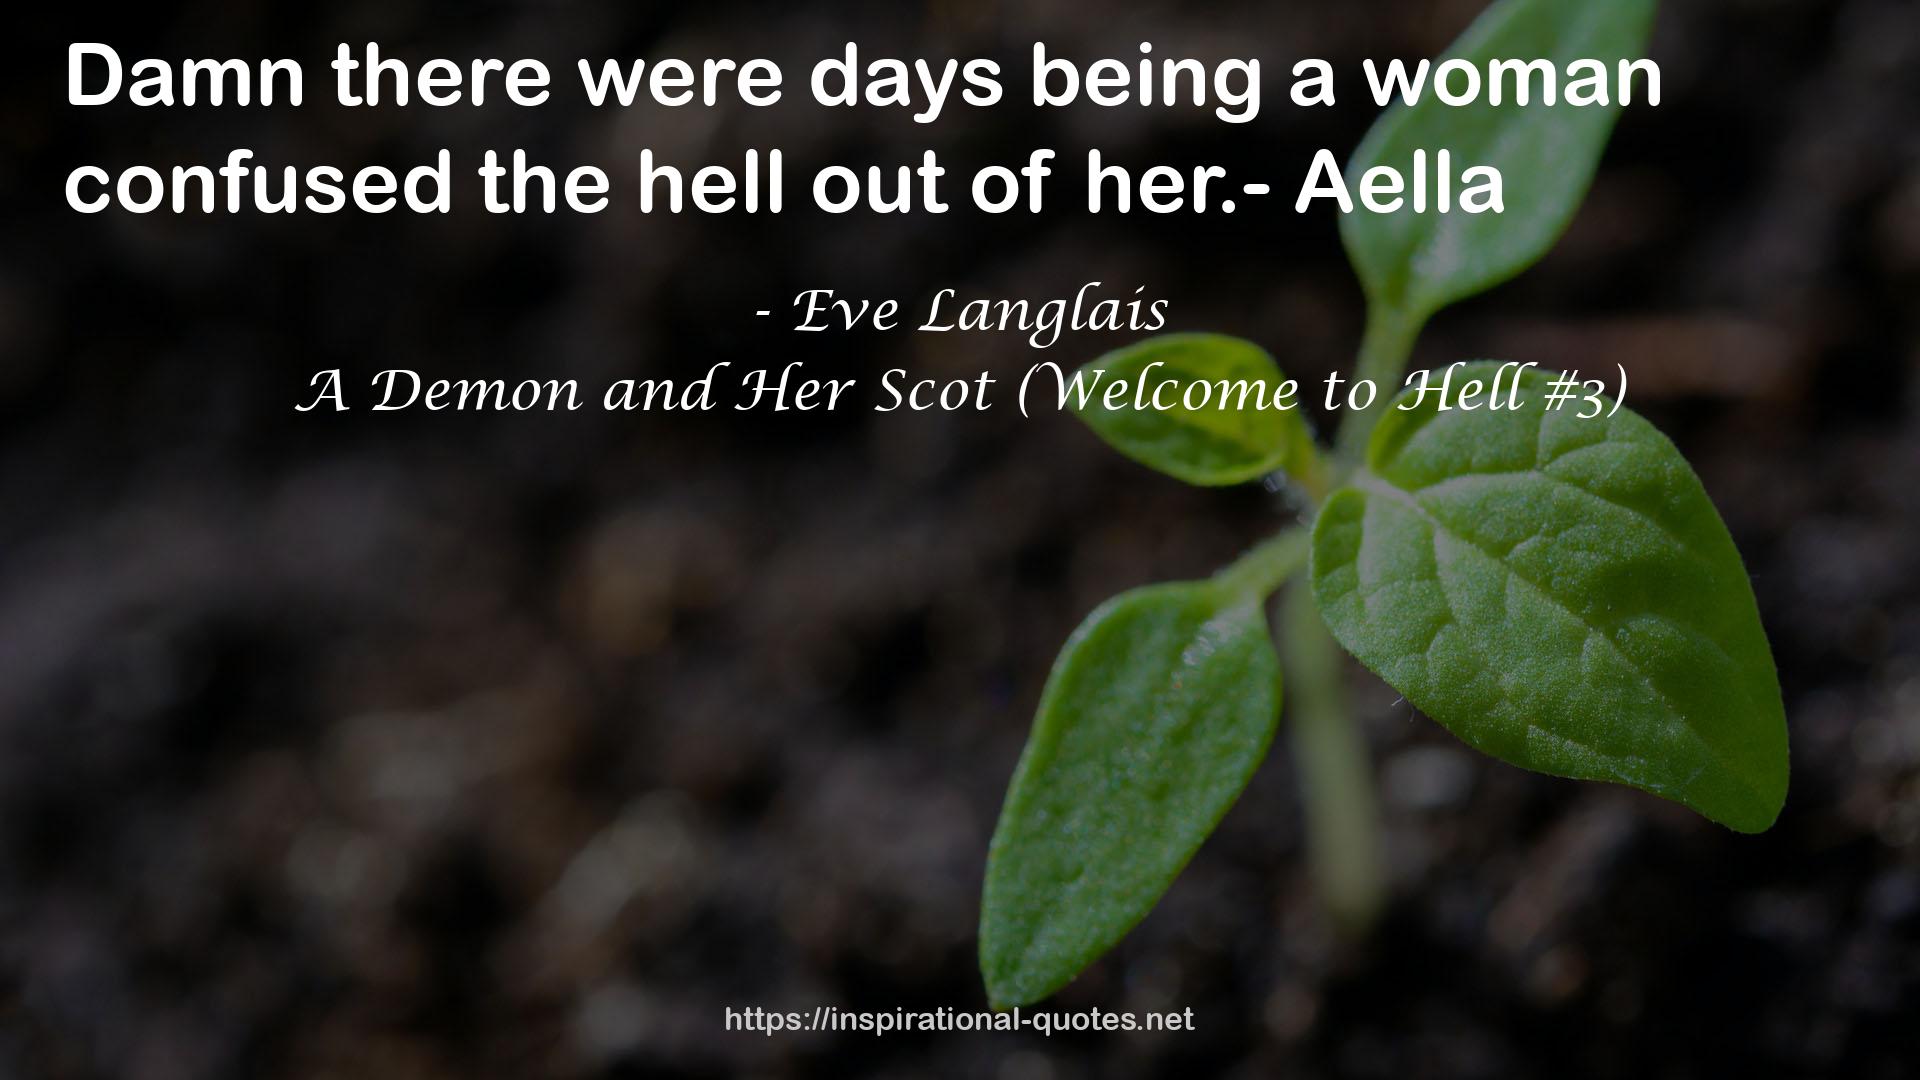 A Demon and Her Scot (Welcome to Hell #3) QUOTES